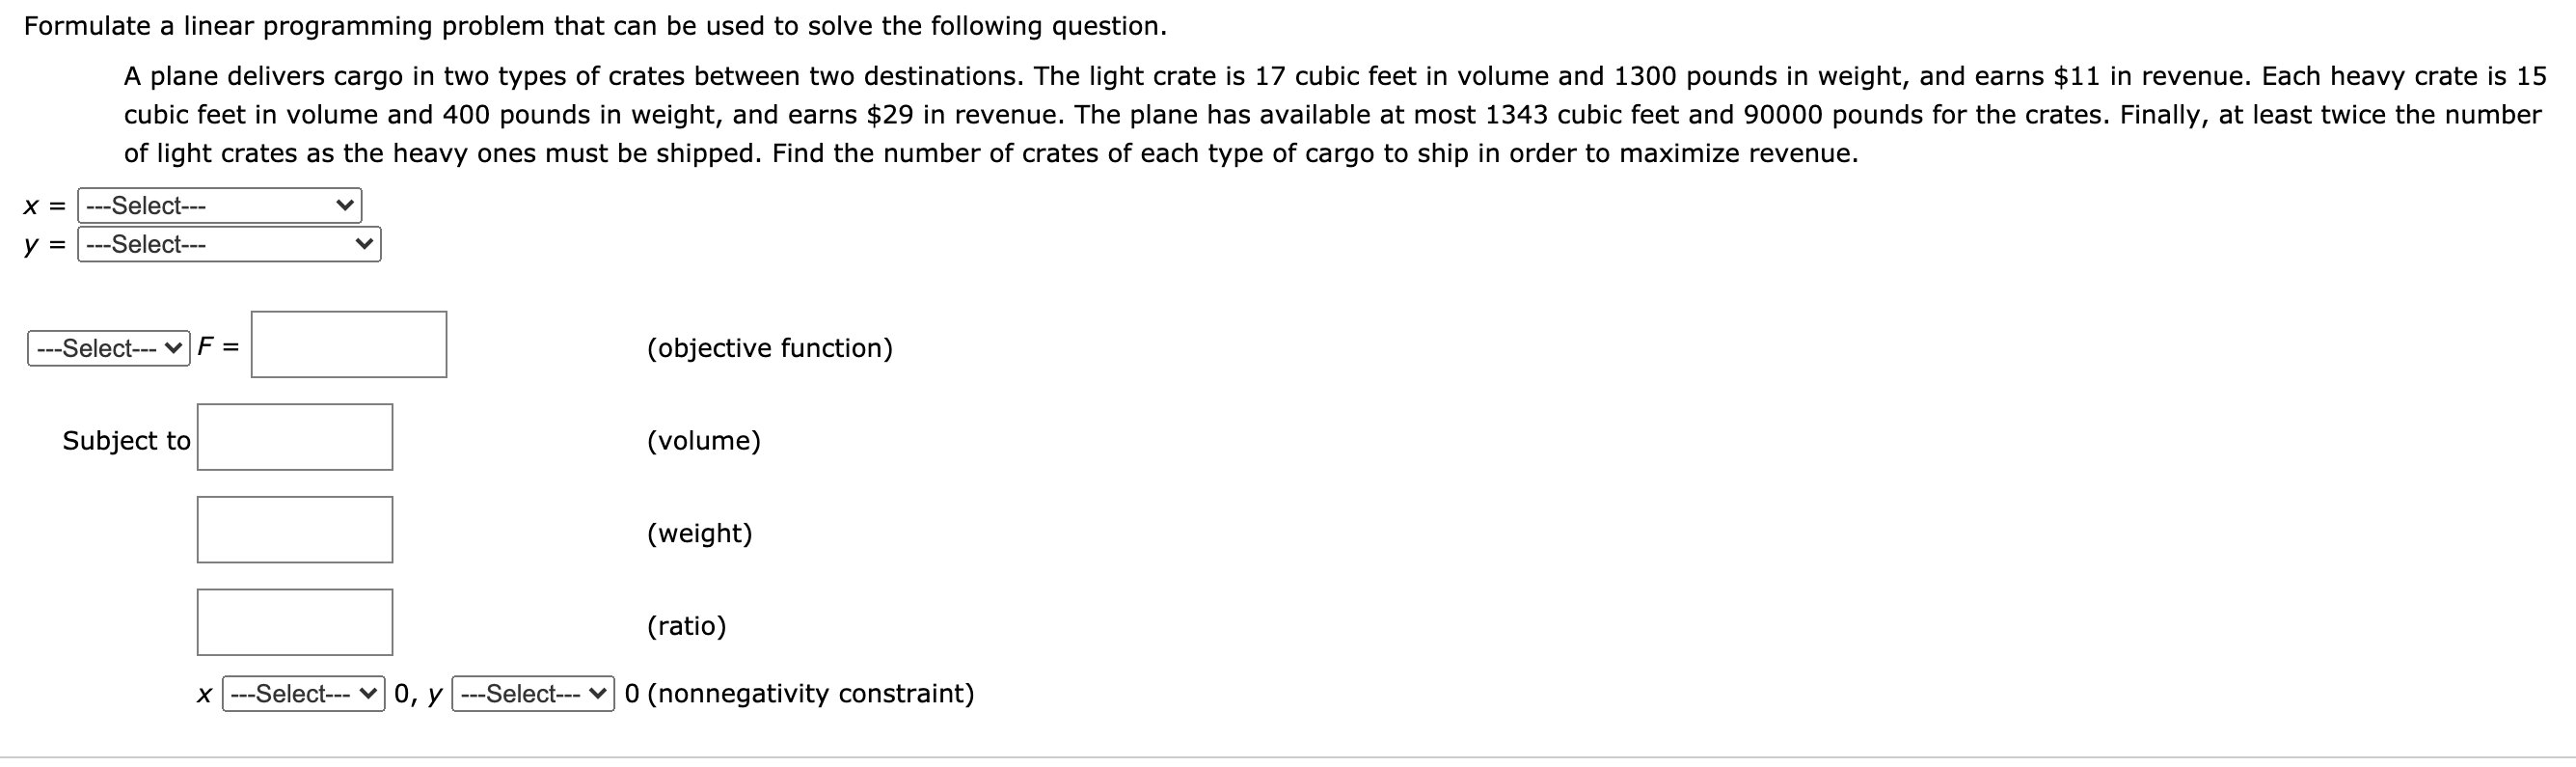 Formulate a linear programming problem that can be used to solve the following question.
A plane delivers cargo in two types of crates between two destinations. The light crate is 17 cubic feet in volume and 1300 pounds in weight, and earns $11 in revenue. Each heavy crate is 15
cubic feet in volume and 400 pounds in weight, and earns $29 in revenue. The plane has available at most 1343 cubic feet and 90000 pounds for the crates. Finally, at least twice the number
of light crates as the heavy ones must be shipped. Find the number of crates of each type of cargo to ship in order to maximize revenue.
X = |---Select---
y =
---Select---
---Select--- vF =
(objective function)
Subject to
(volume)
(weight)
(ratio)
x ---Select--- v 0, y ---Select--- v0 (nonnegativity constraint)
